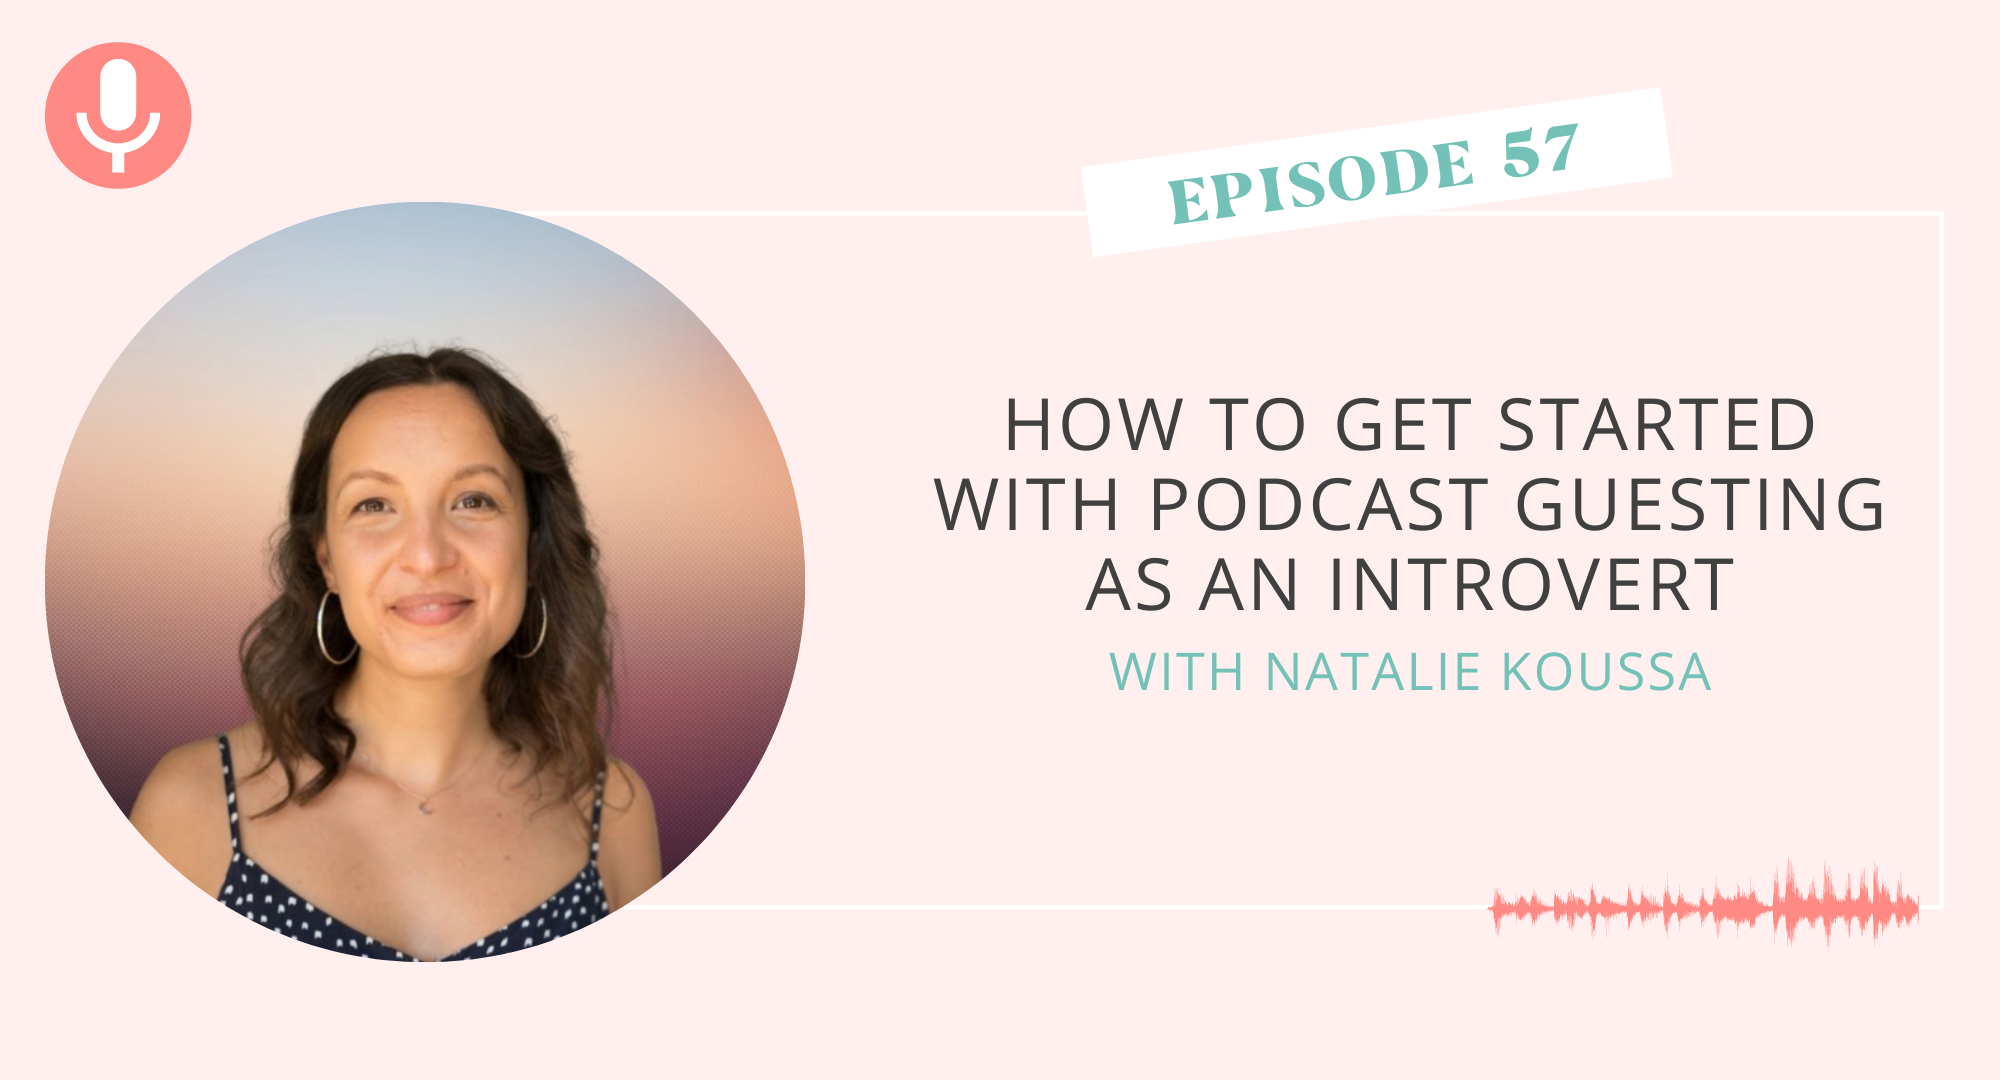 How to Get Started With Podcast Guesting as an Introvert